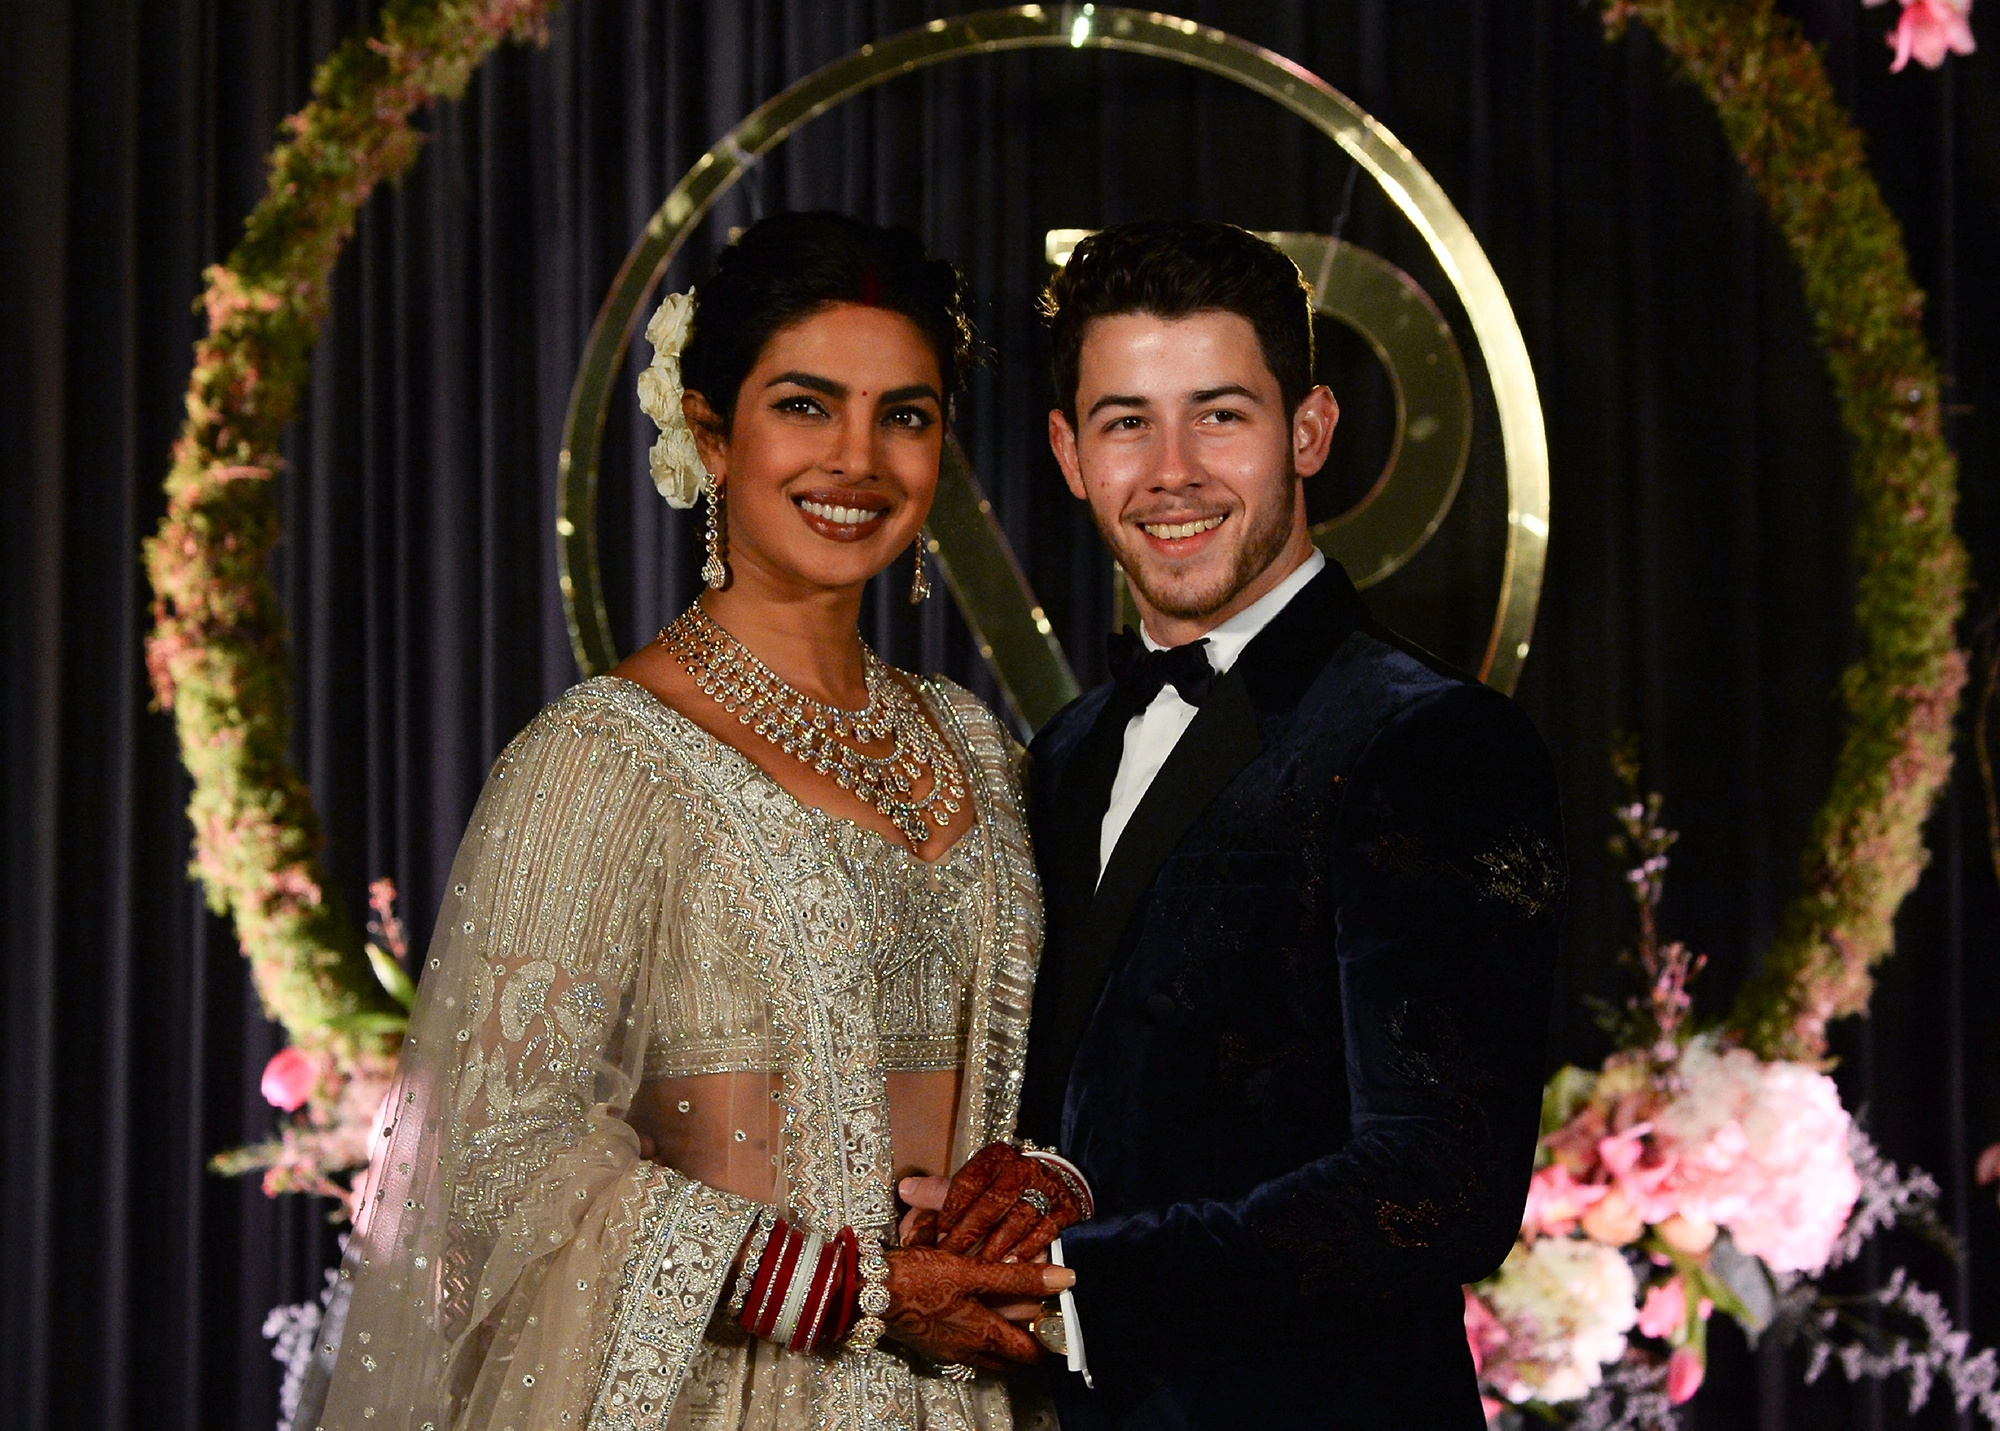 Priyanka Chopra and Nick Jonas: The couple first met in 2016 at the Vanity Fair Oscars party. 2000x1440 HD Wallpaper.